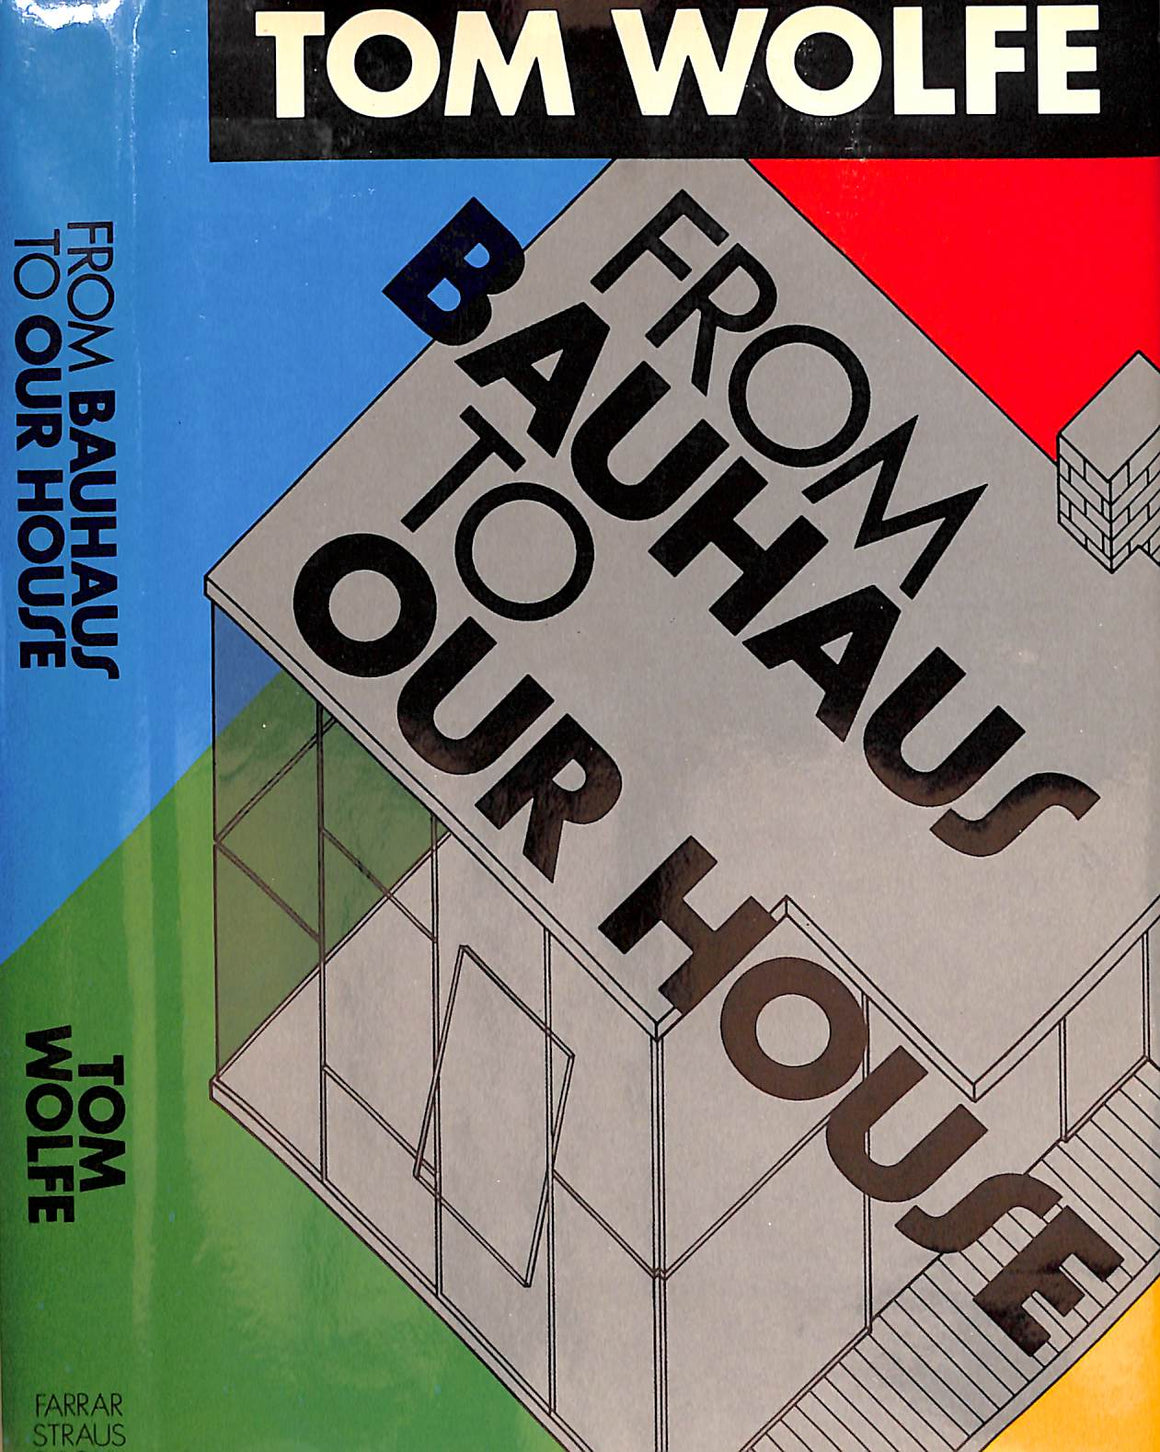 "From Bauhaus To Our House" 1981 WOLFE, Tom